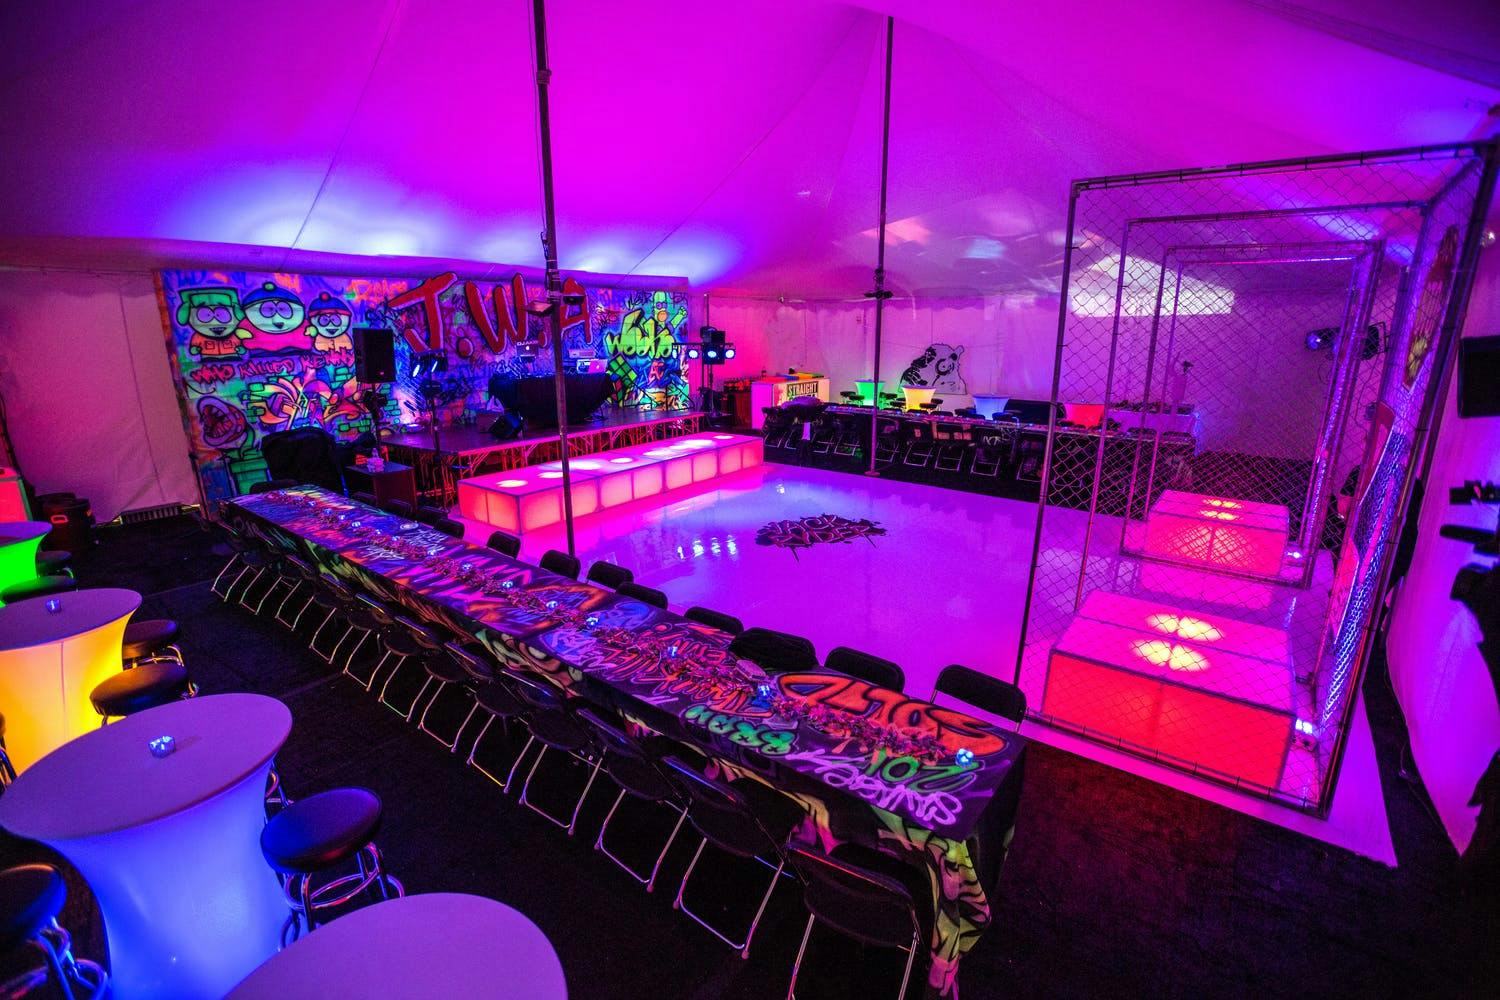 Graffiti-Themed Bar Mitzvah Party With Neon Staging | PartySlate